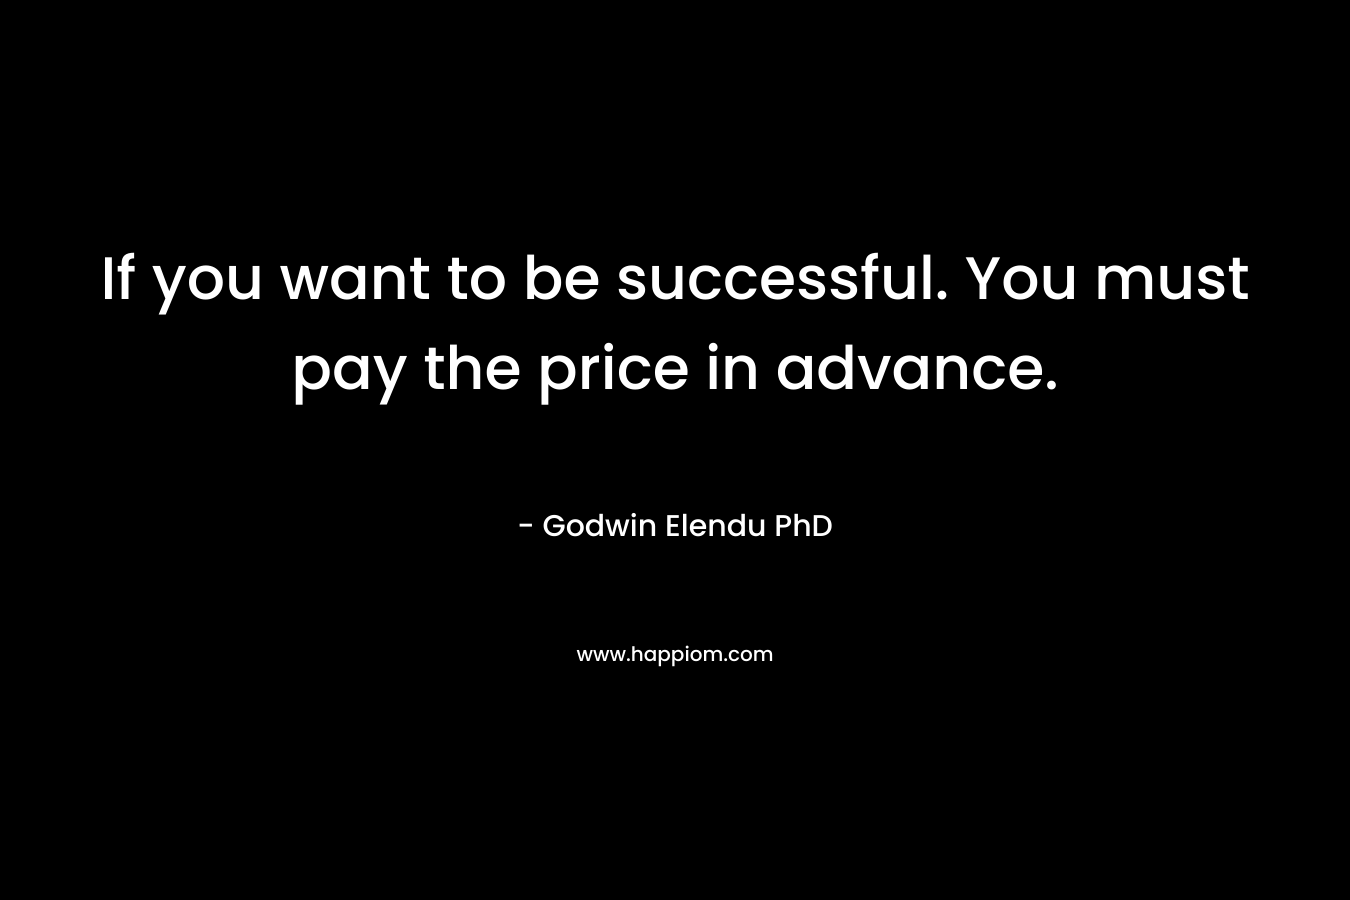 If you want to be successful. You must pay the price in advance. – Godwin Elendu PhD